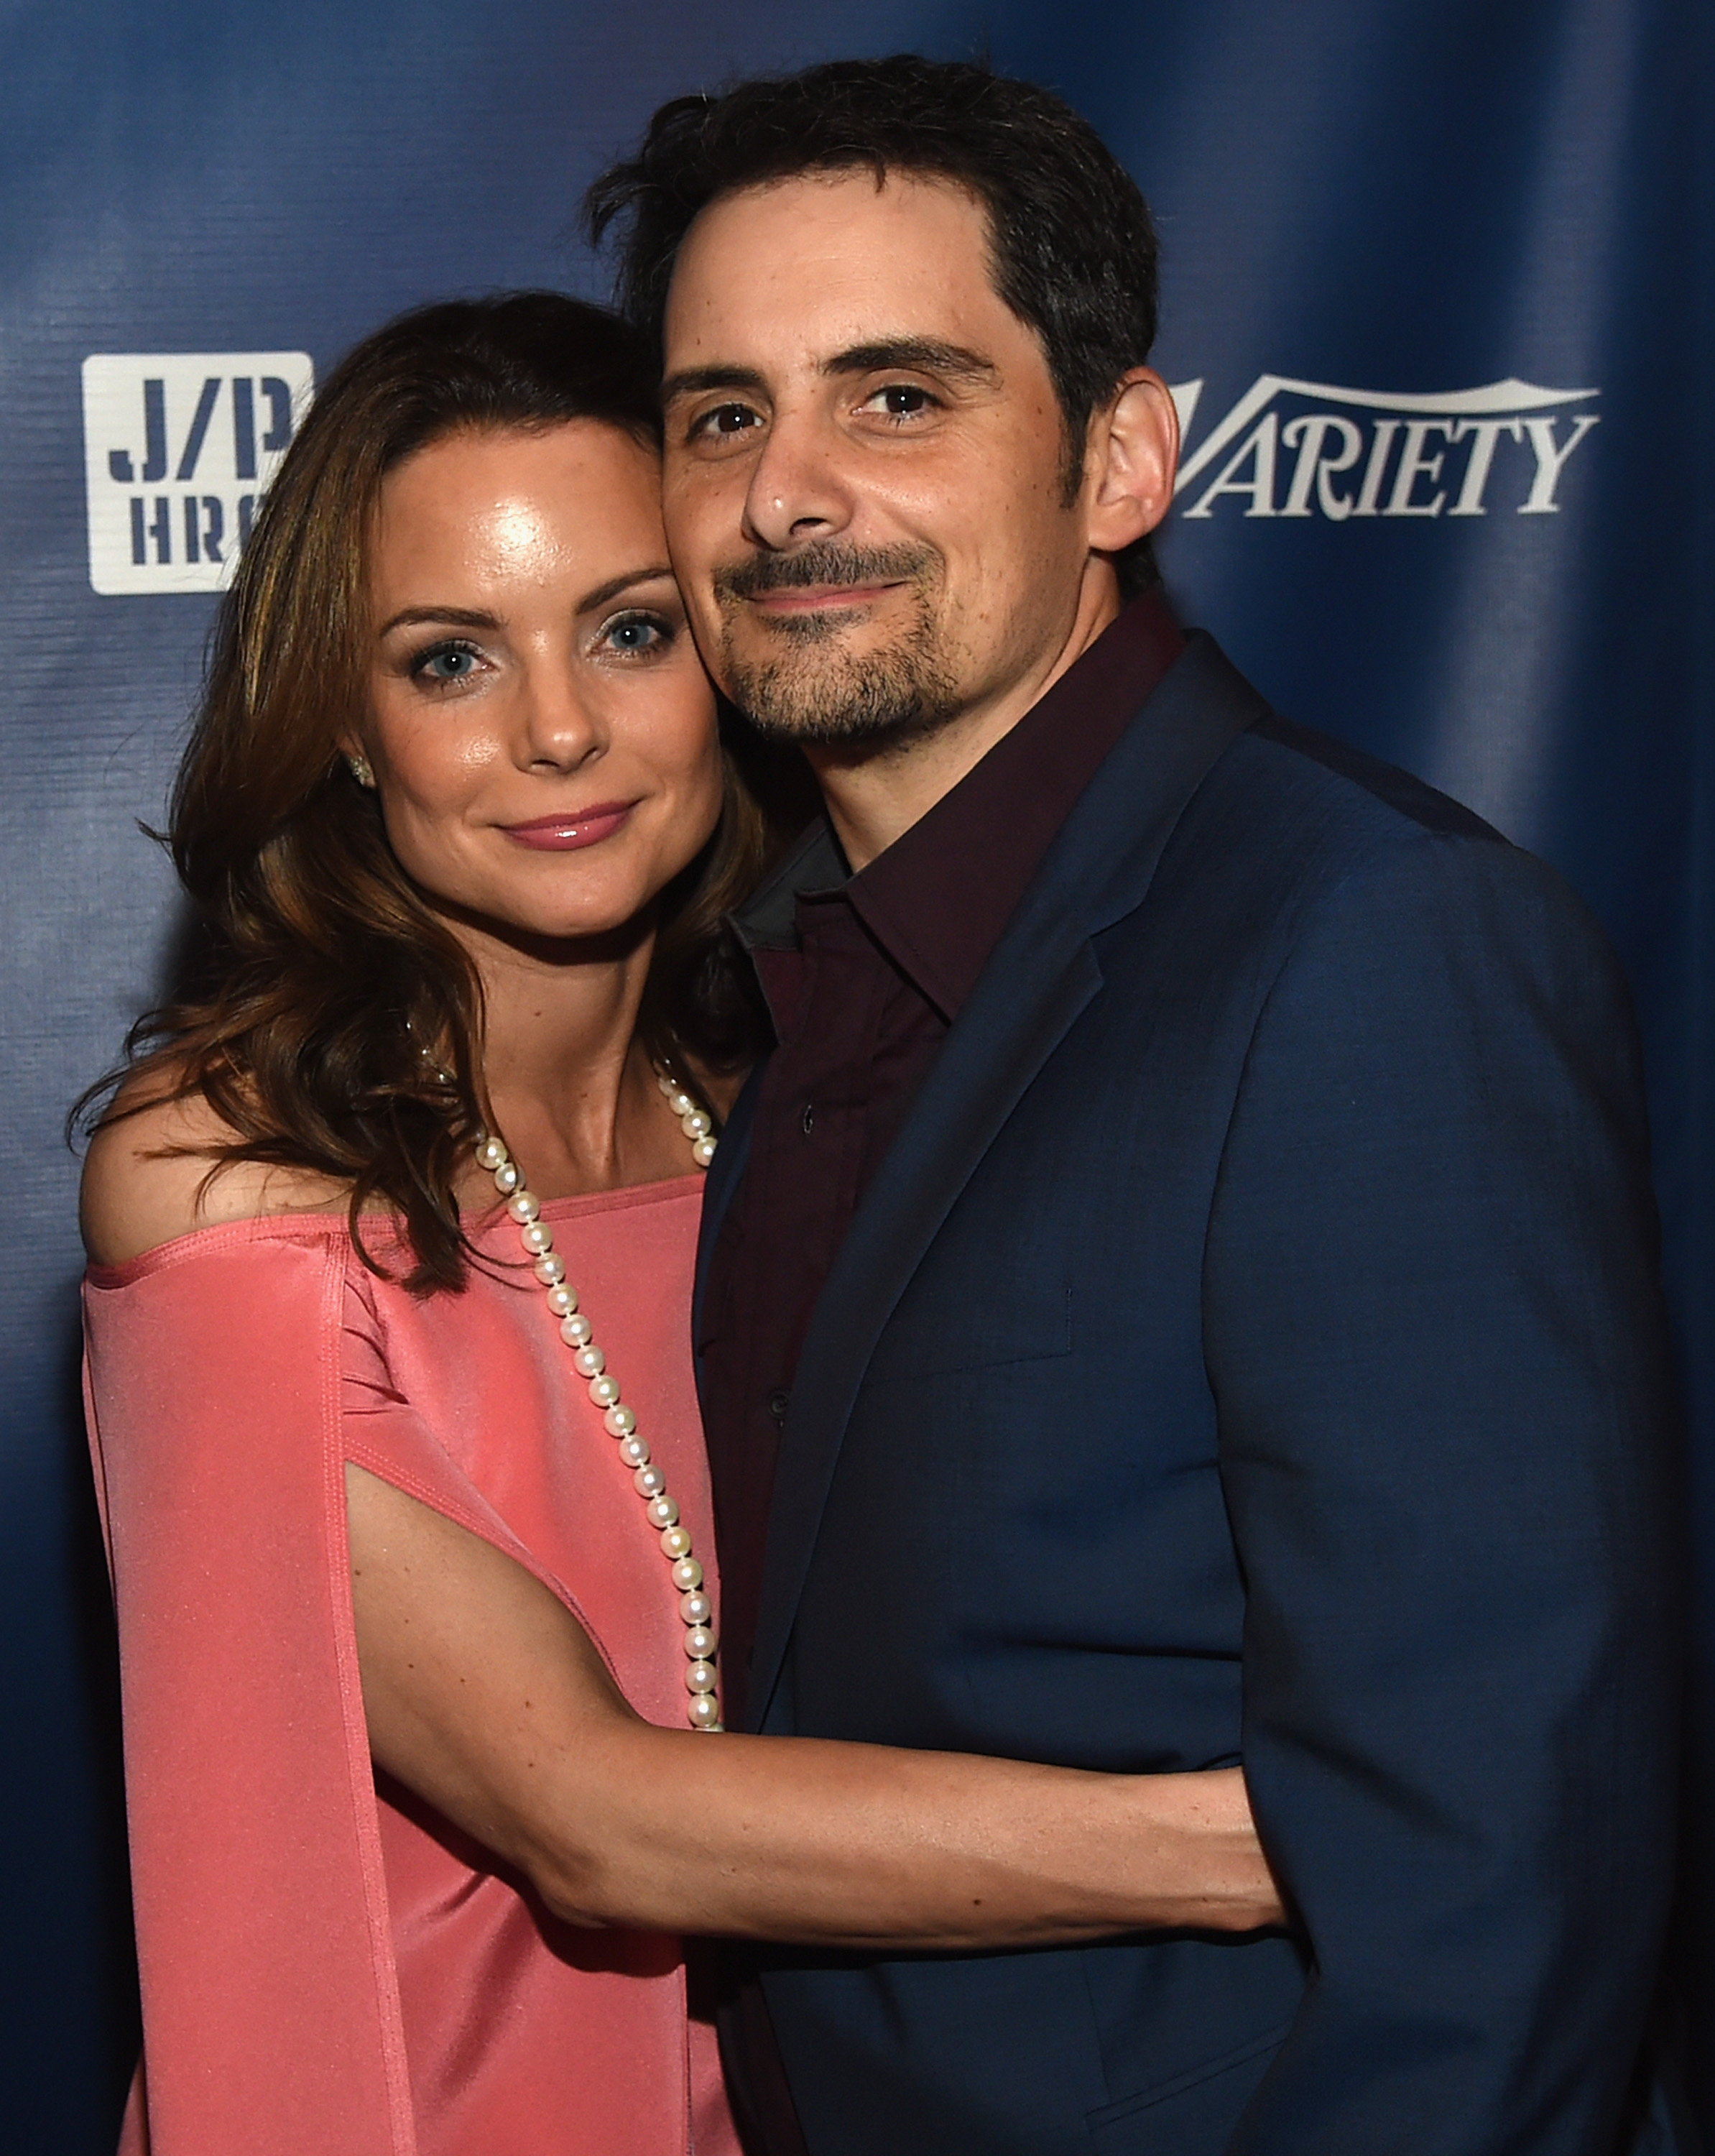 Kimberly Williams-Paisley and Brad Paisley on April 26, 2016 in Nashville, Tennessee | Source: Getty Images